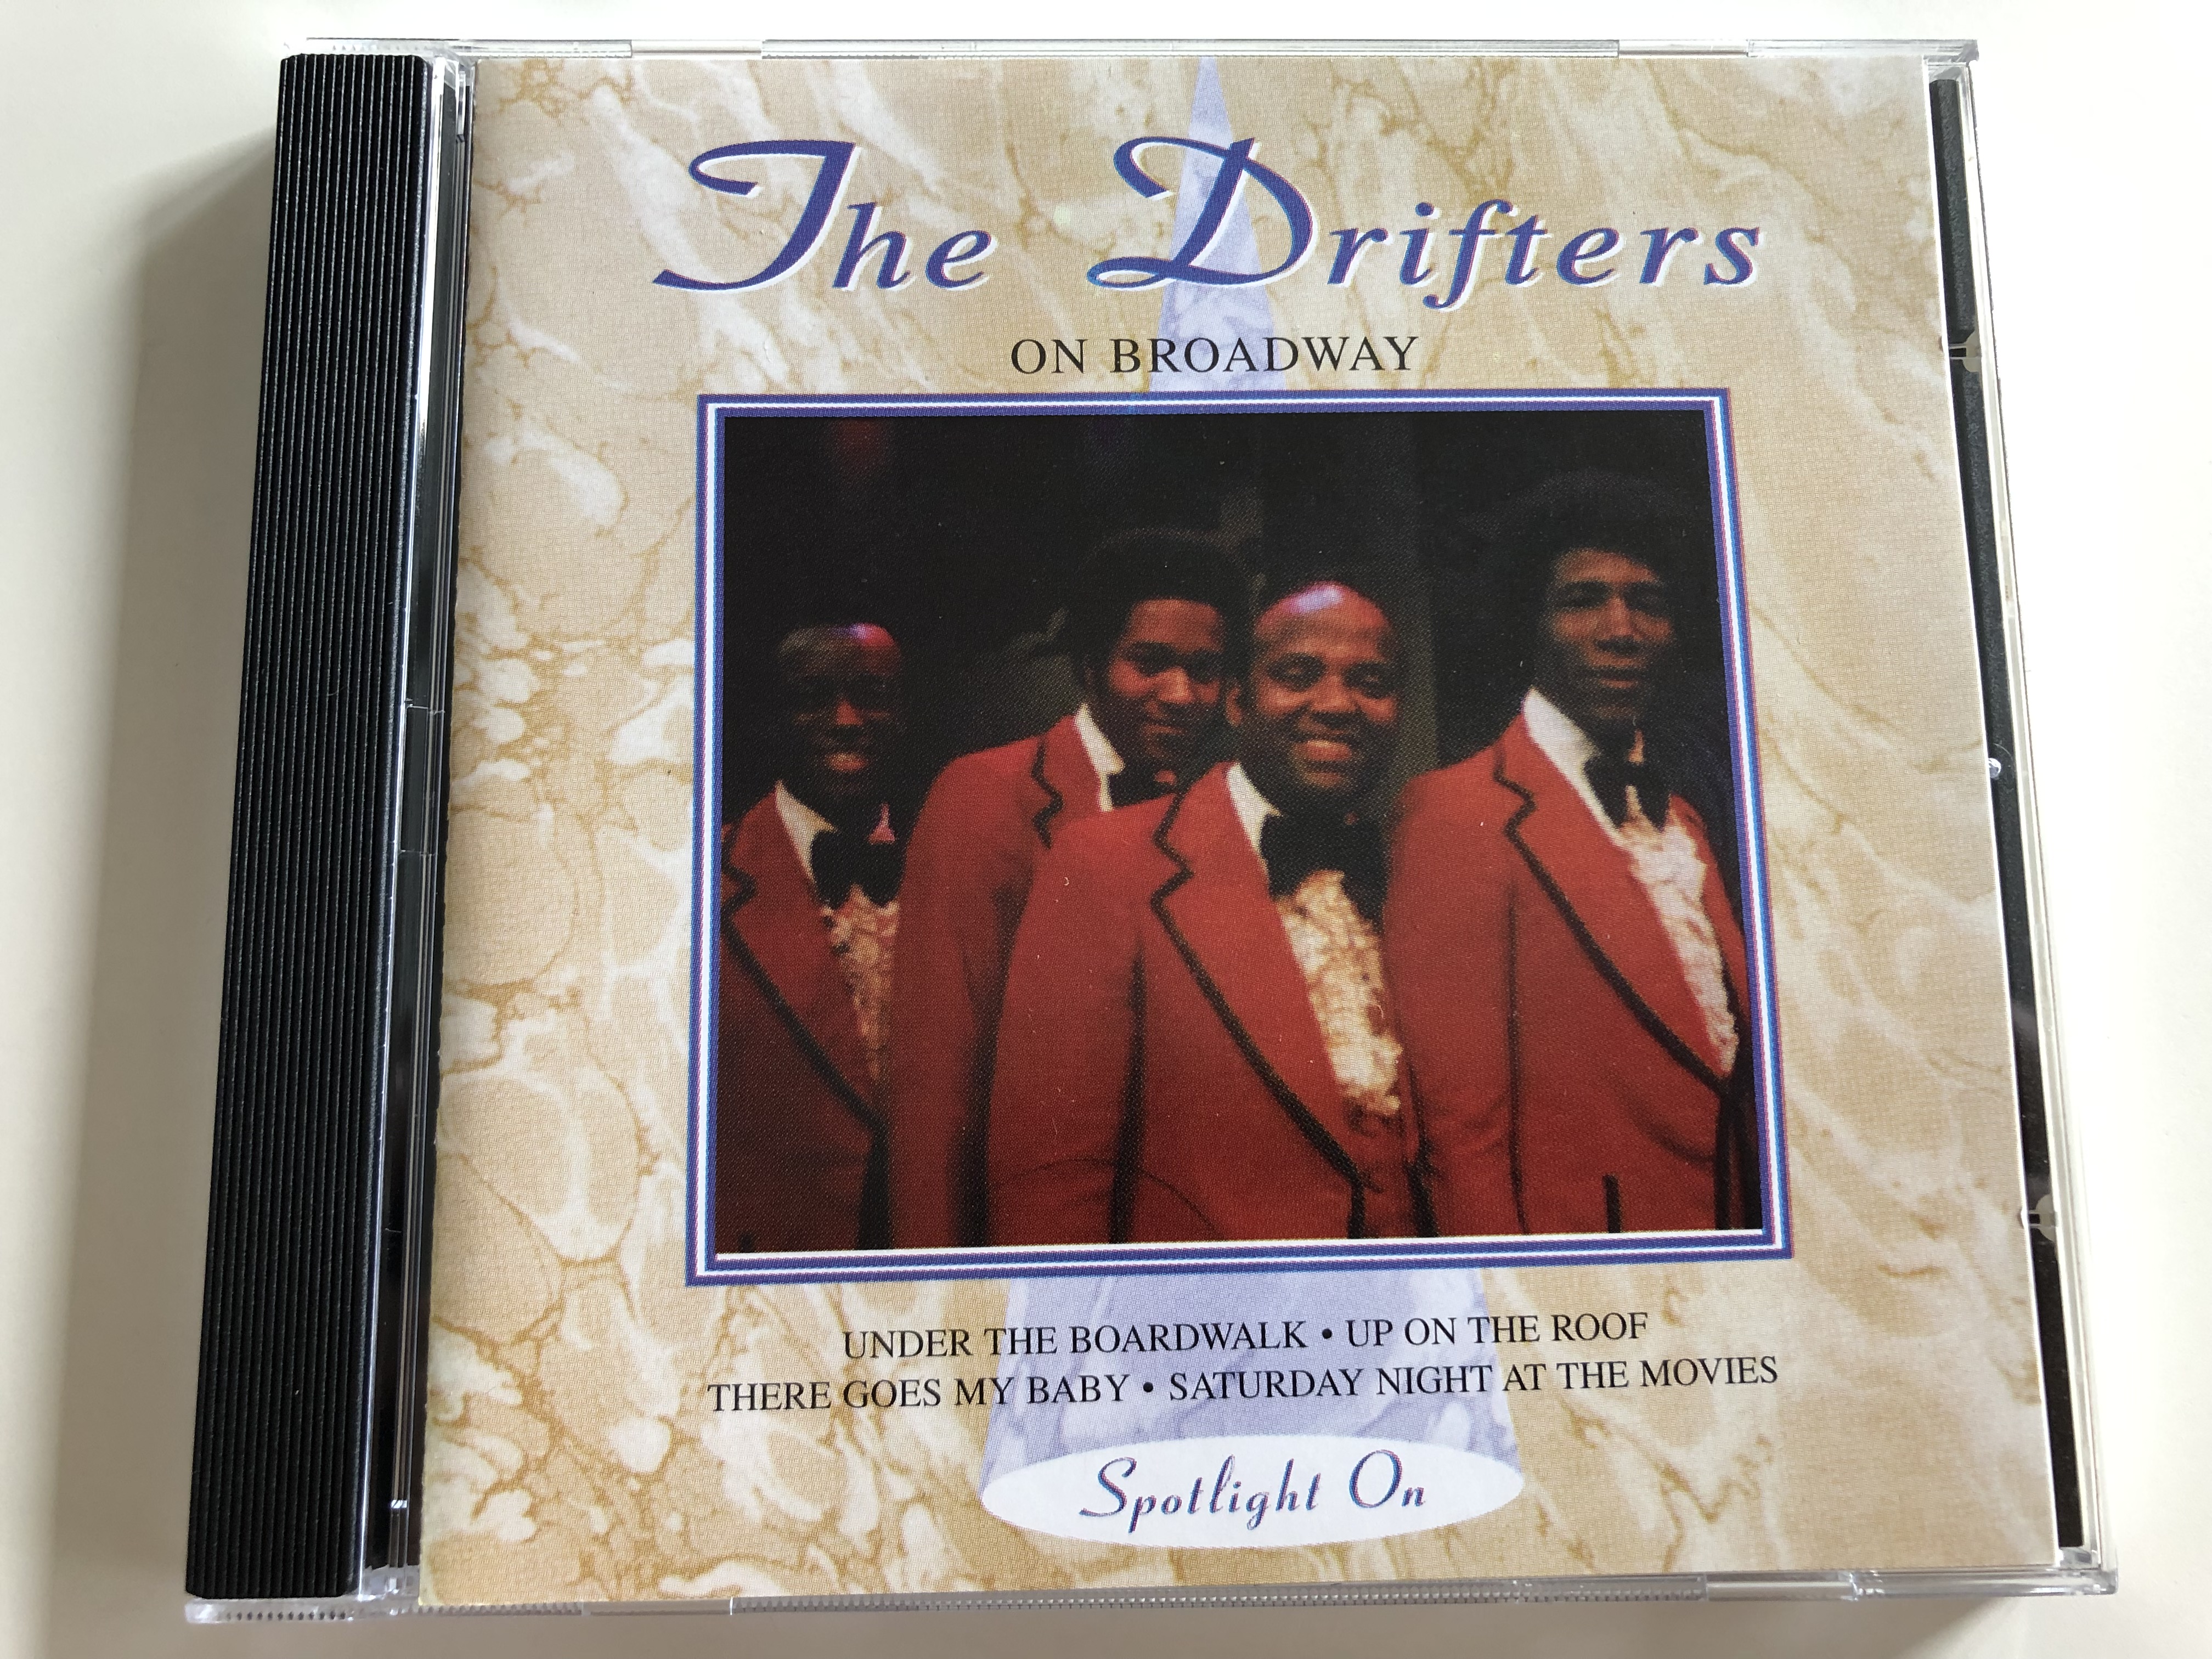 the-drifters-on-broadway-under-the-boardwalk-up-on-the-roof-there-goes-my-baby-saturday-night-at-the-movies-audio-cd-1994-javelin-hadcd122-1-.jpg